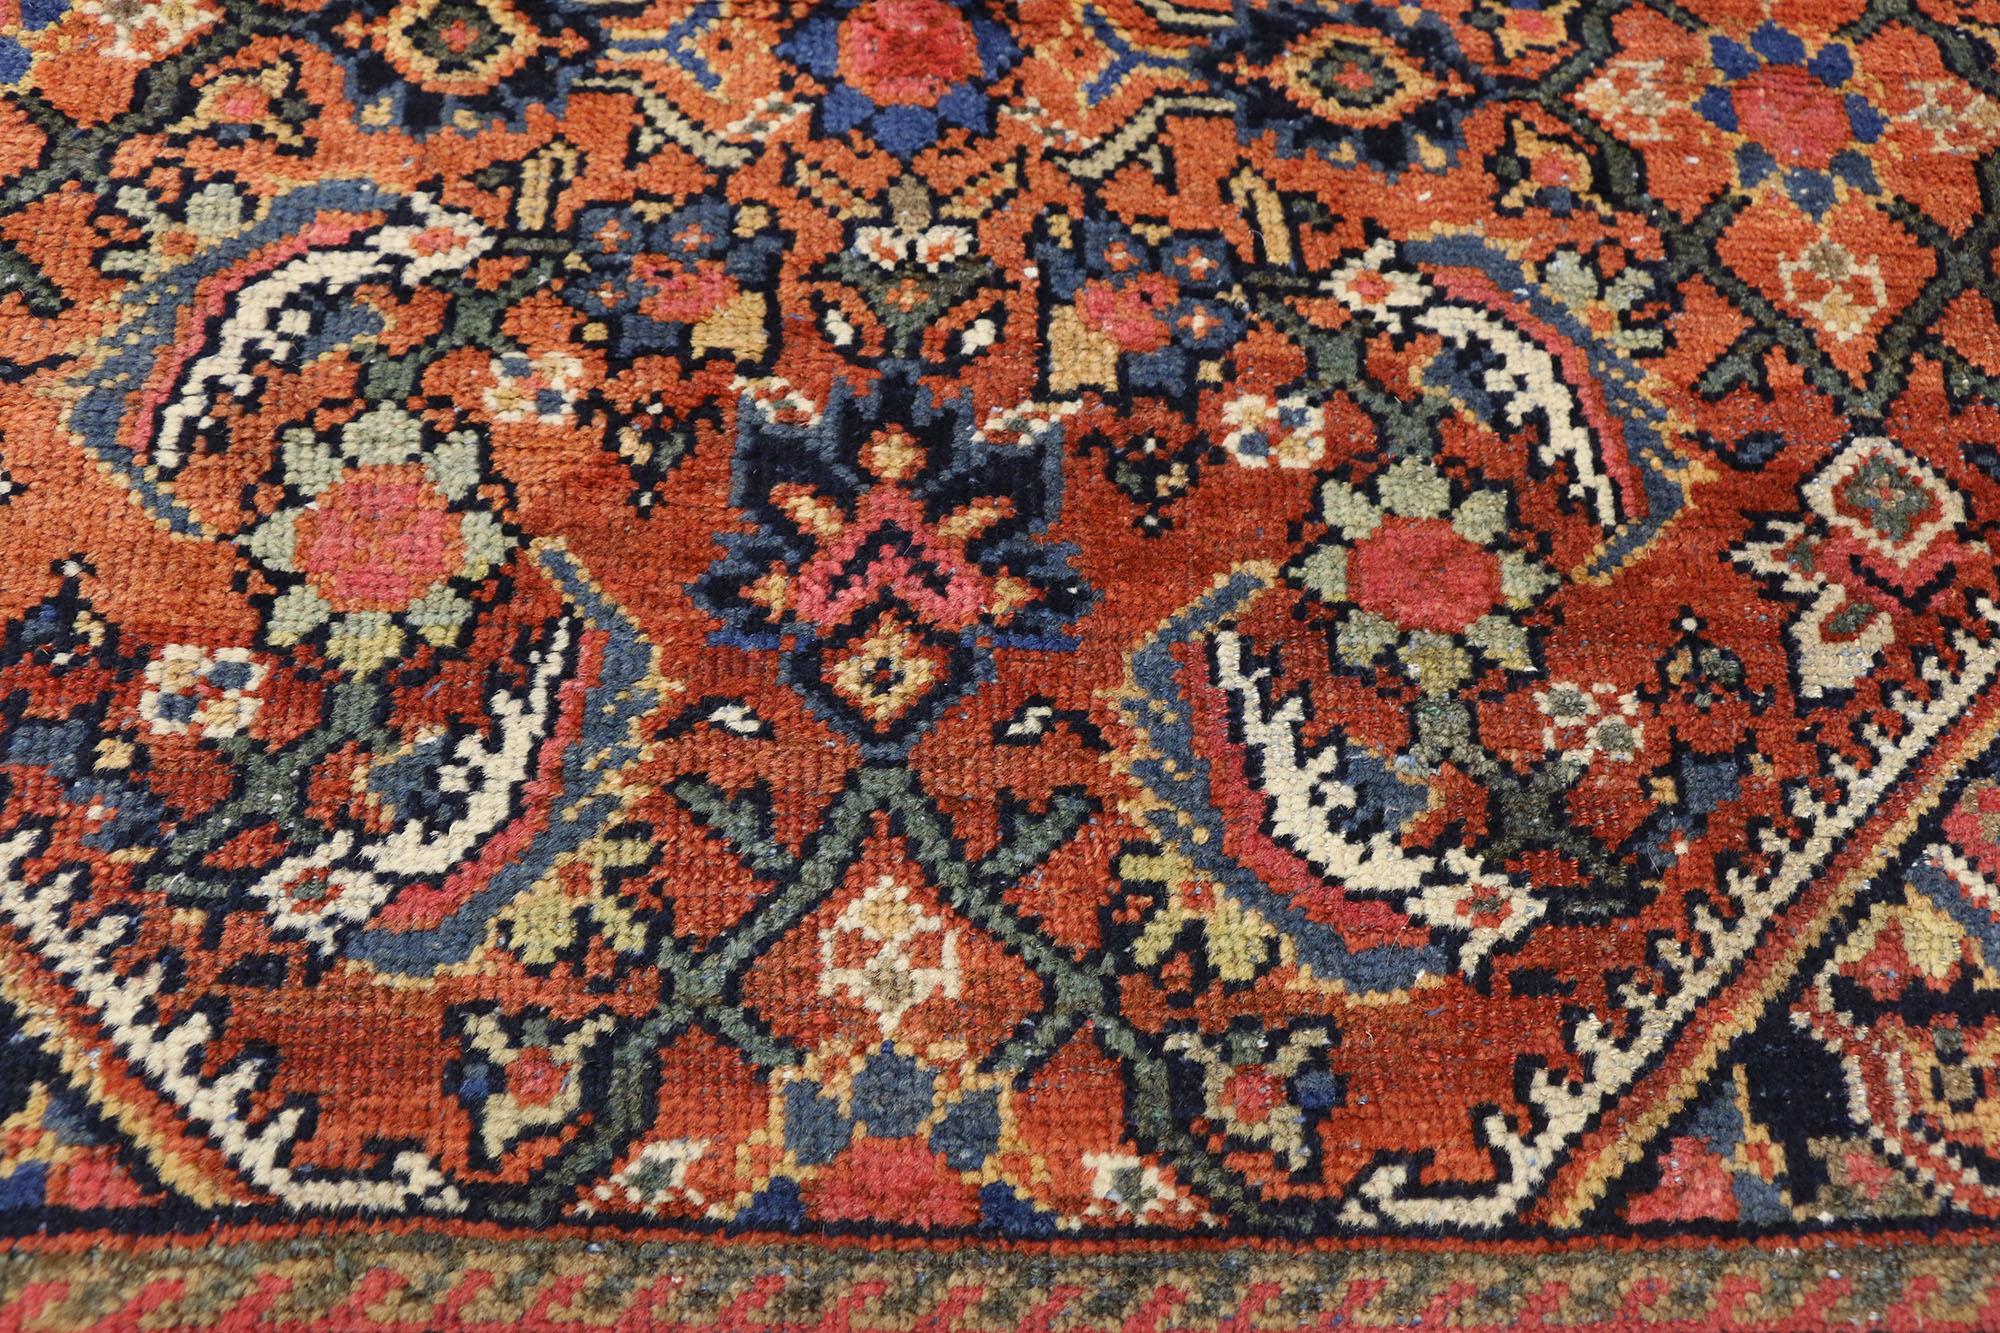 Antique Persian Mahal Rug with Traditional Style In Good Condition For Sale In Dallas, TX